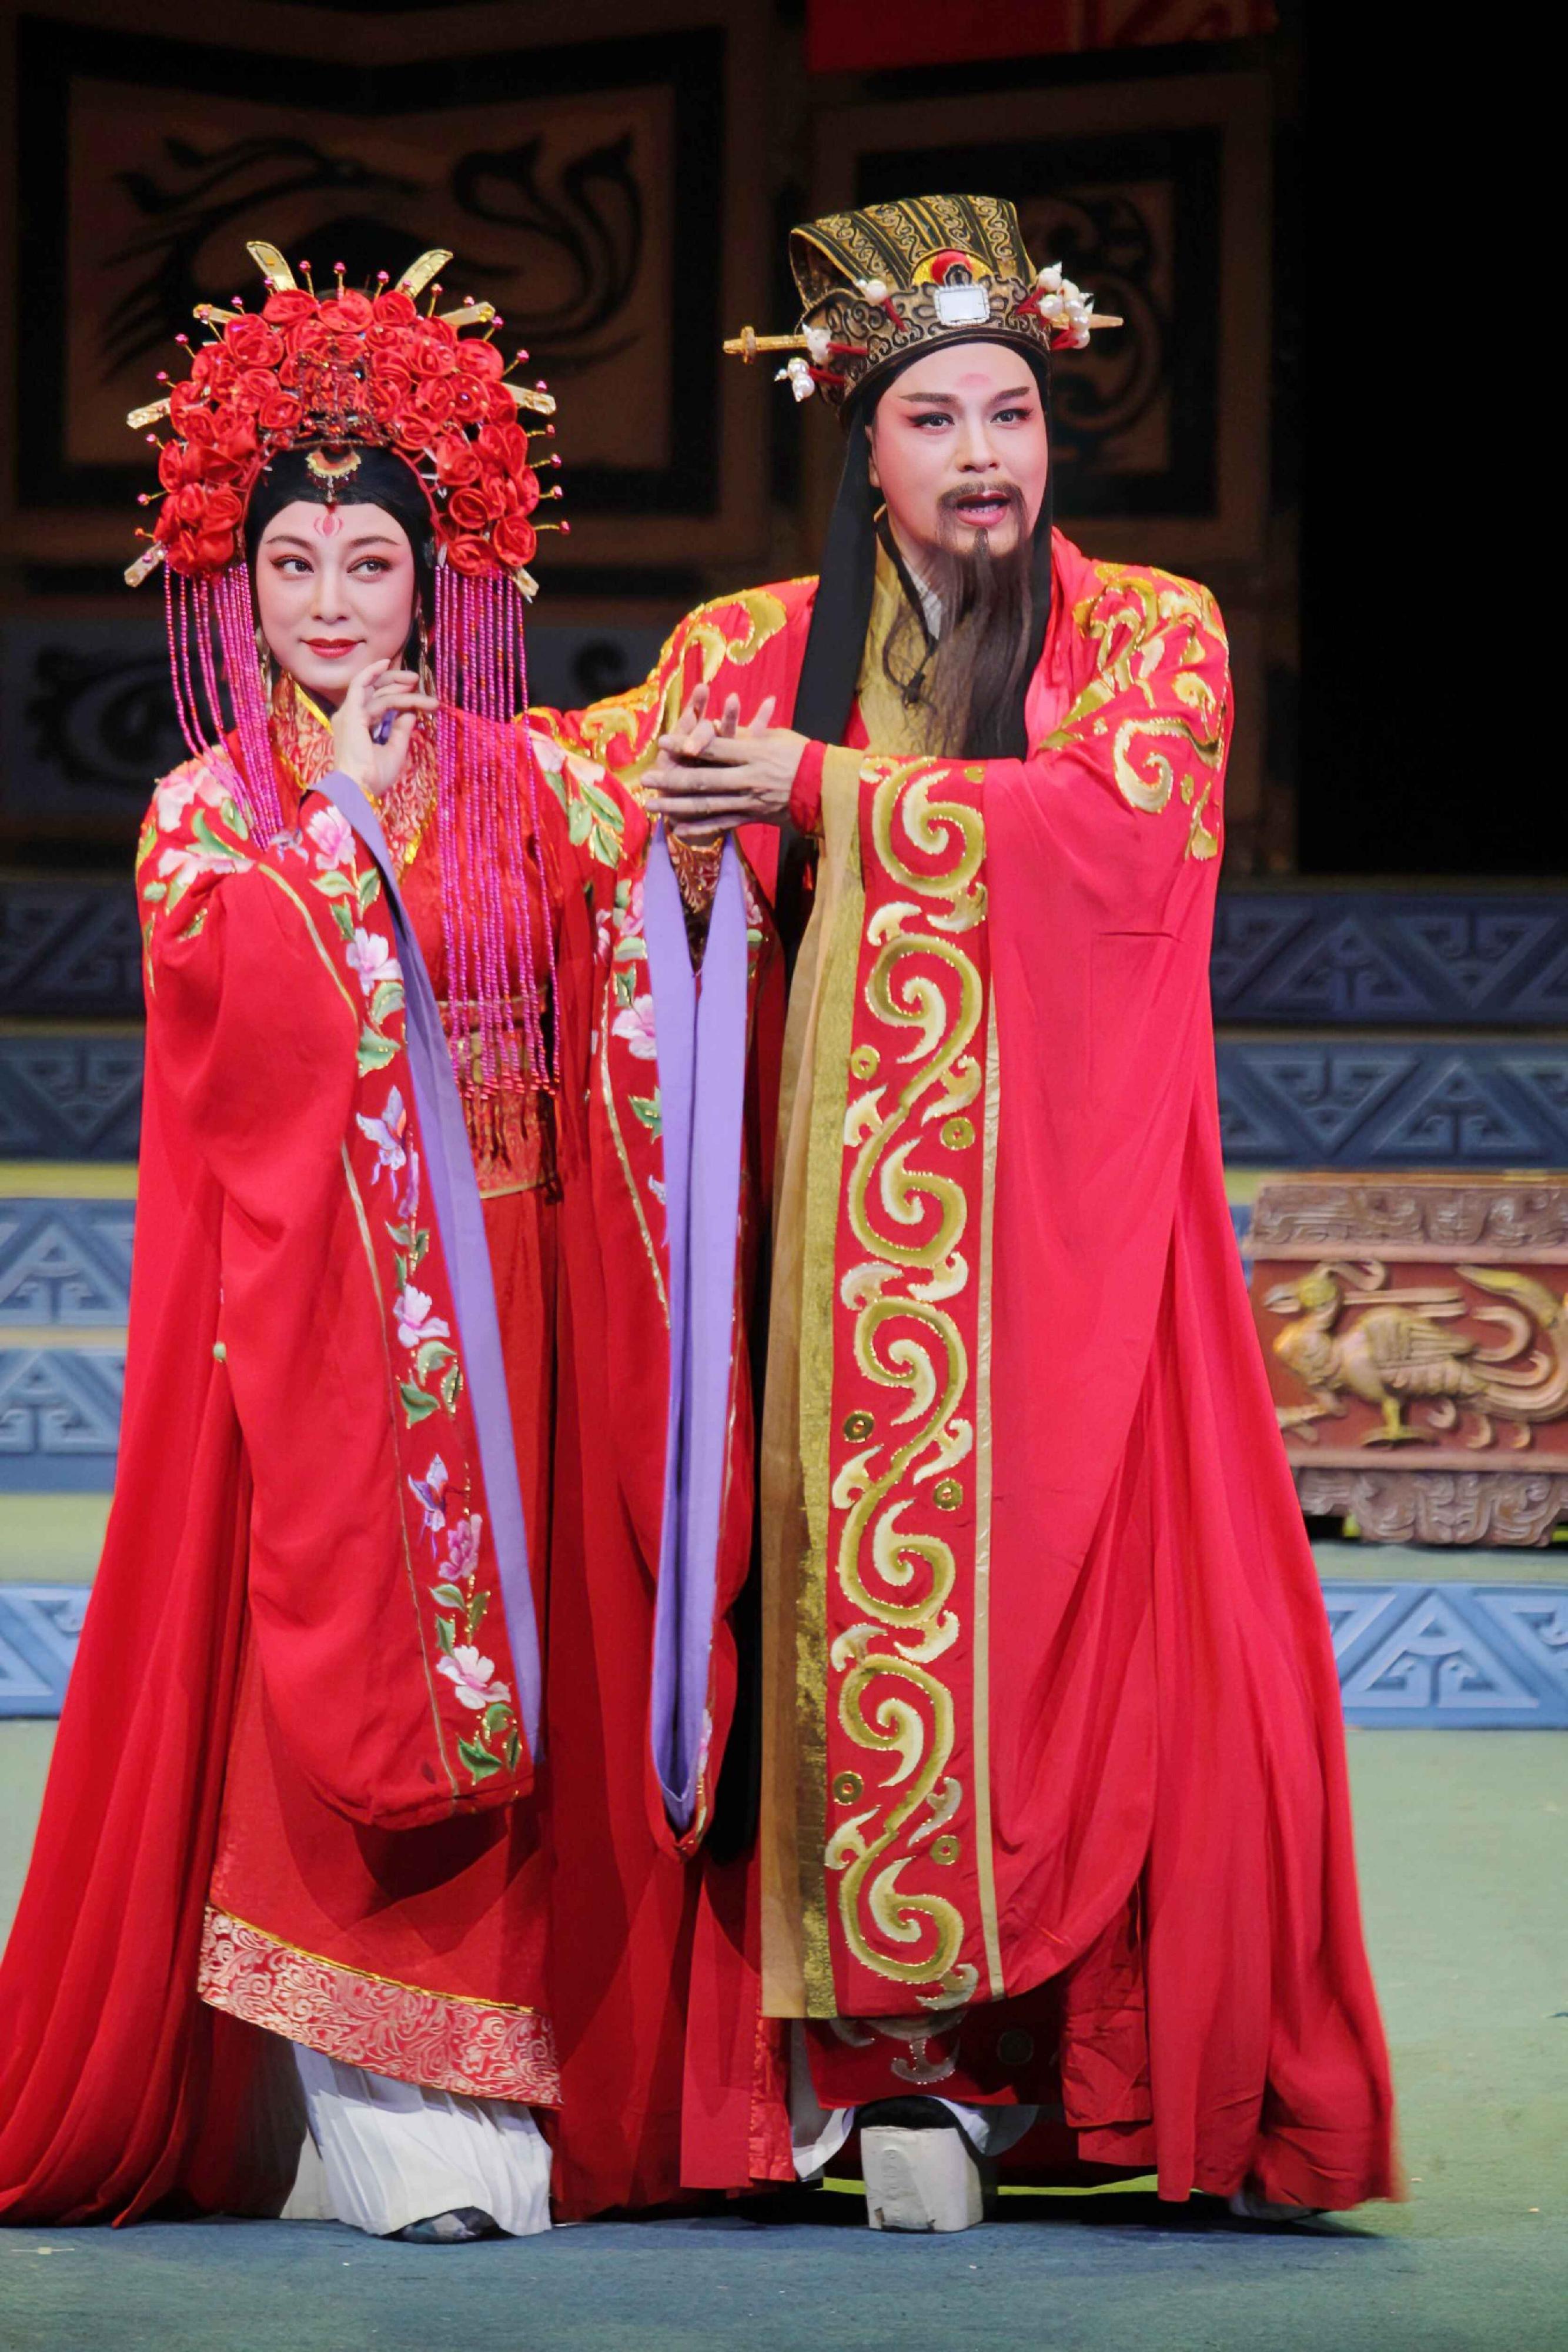 The Guangdong Chiu Chow Opera Theatre Number One Troupe and Sun Hon Kwong Chiu Chow Opera Troupe will collaborate for three captivating Chiuchow opera performances at the inaugural Chinese Culture Festival in late June. Photo shows a scene from "Princess of Eastern Wu".